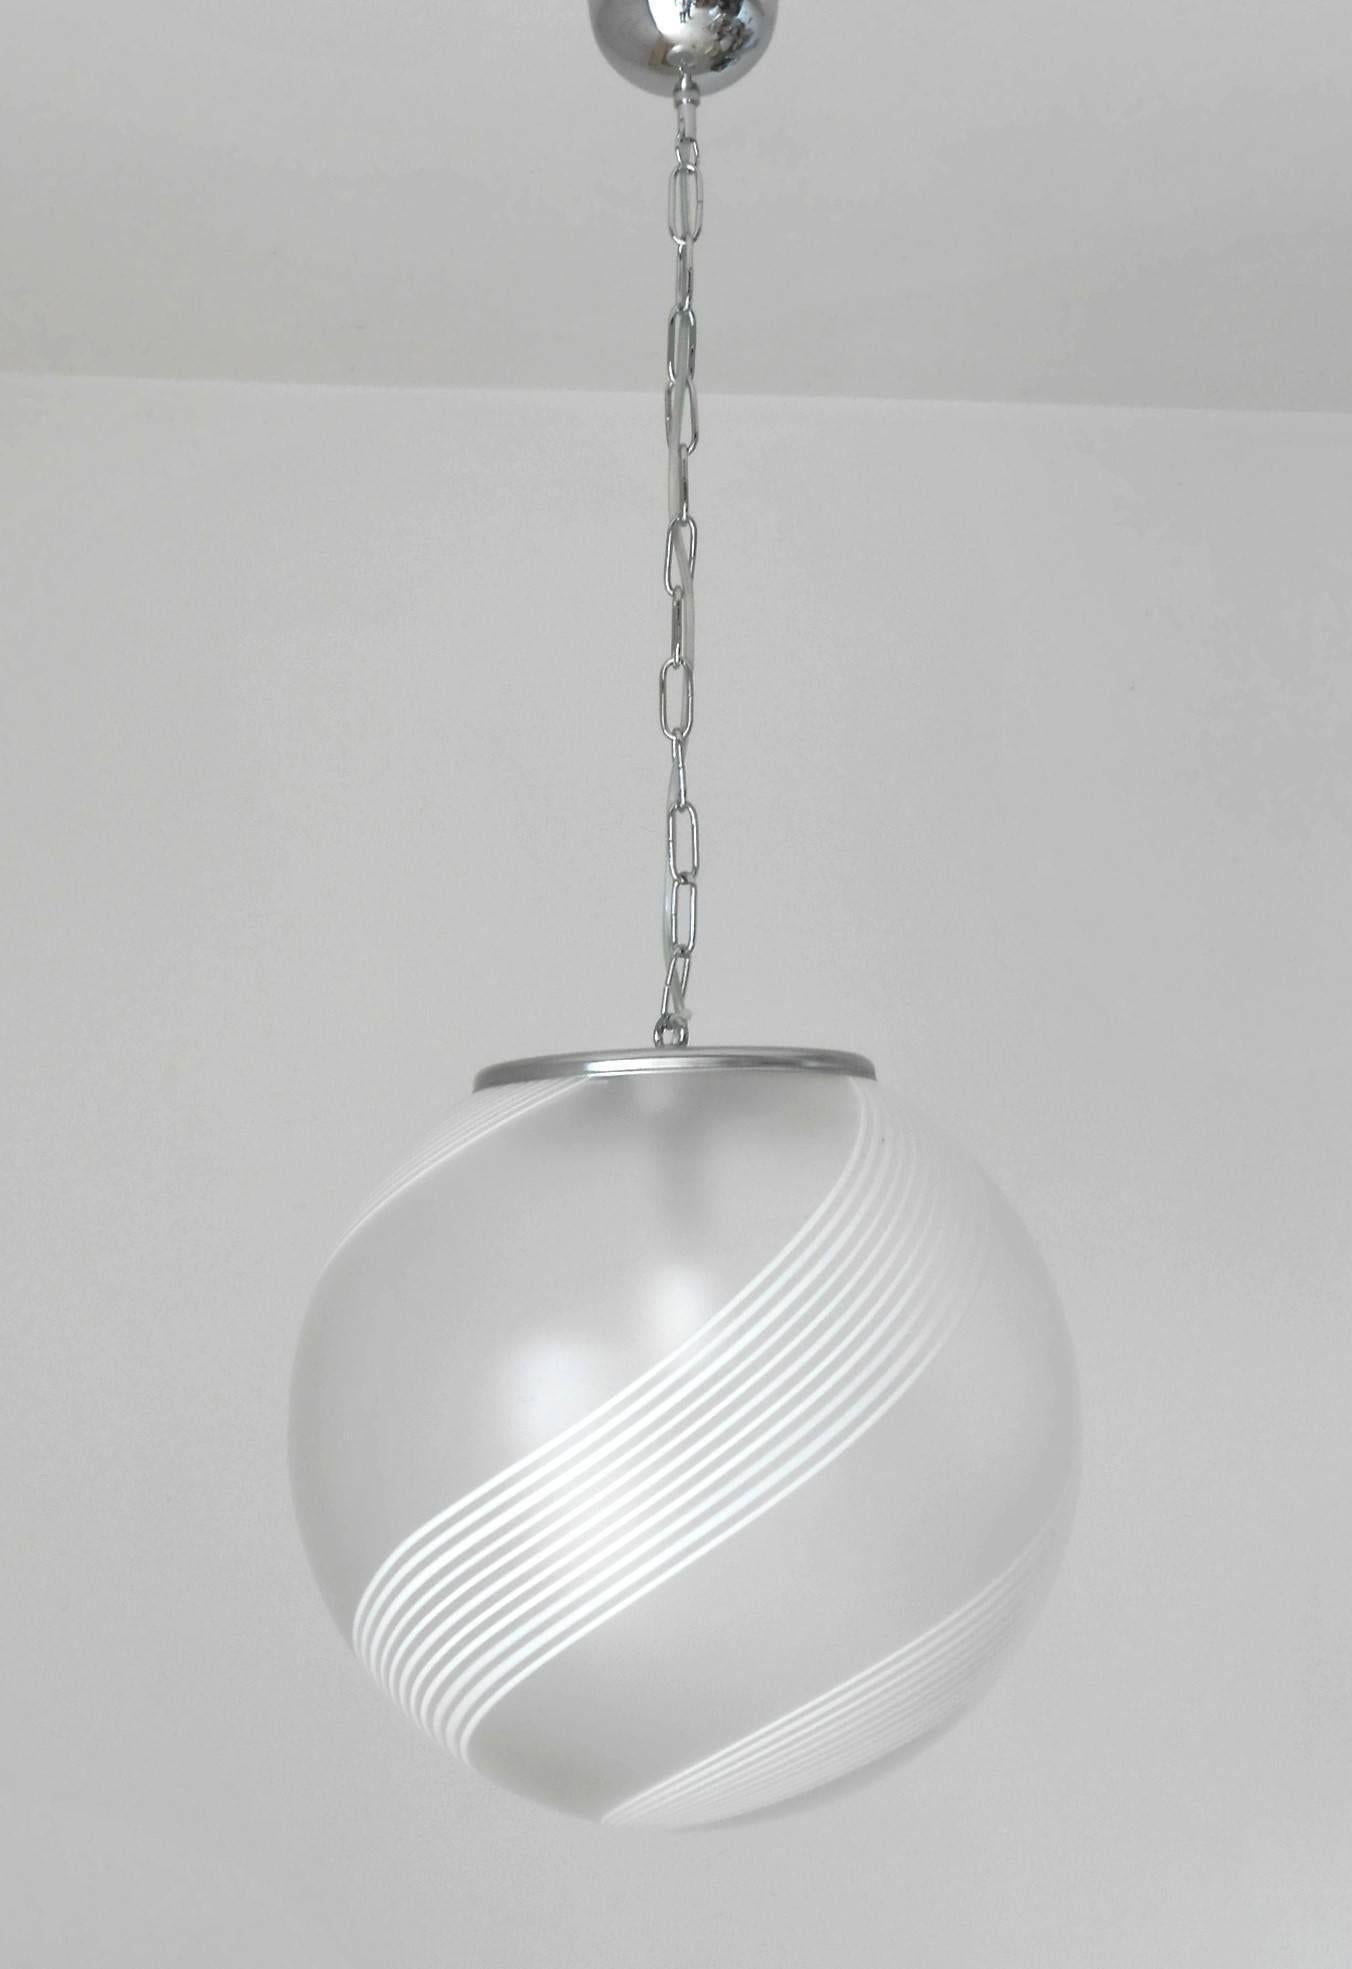 Vintage Italian pendant with frosted Murano glass globe with hand blown white Murano glass stripes, mounted on chrome hardware / Designed by Venini circa 1960s / Made in Italy 1 light / E26 or E27 type / max 60W
Measures: diameter: 16 inches /